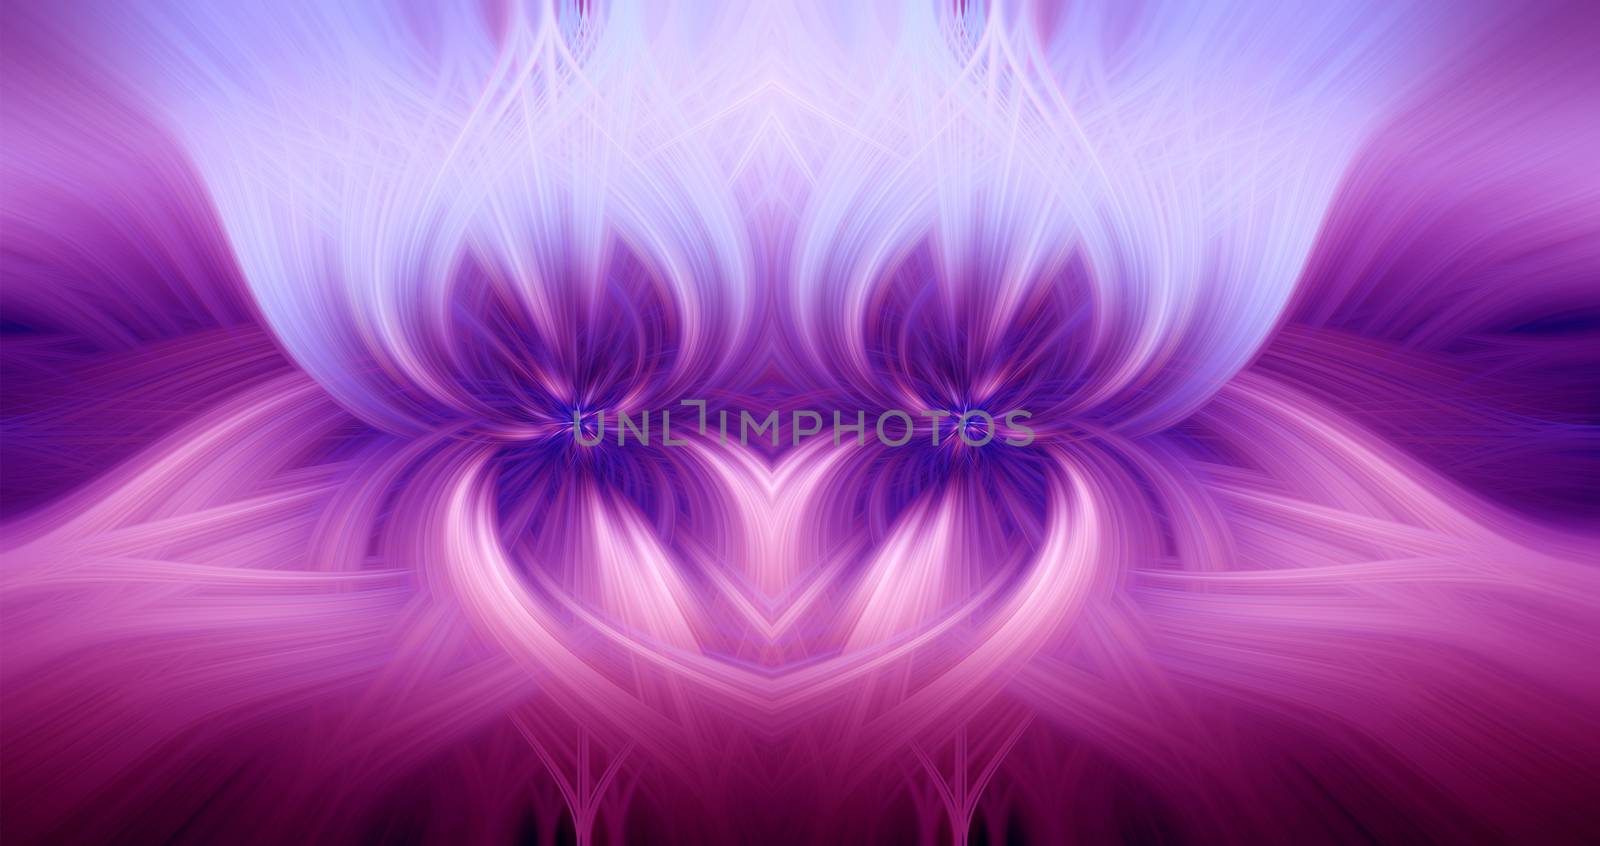 Beautiful abstract intertwined 3d fibers forming an ornament made of various symmetrical shapes. Pink, purple, and blue colors. Illustration.